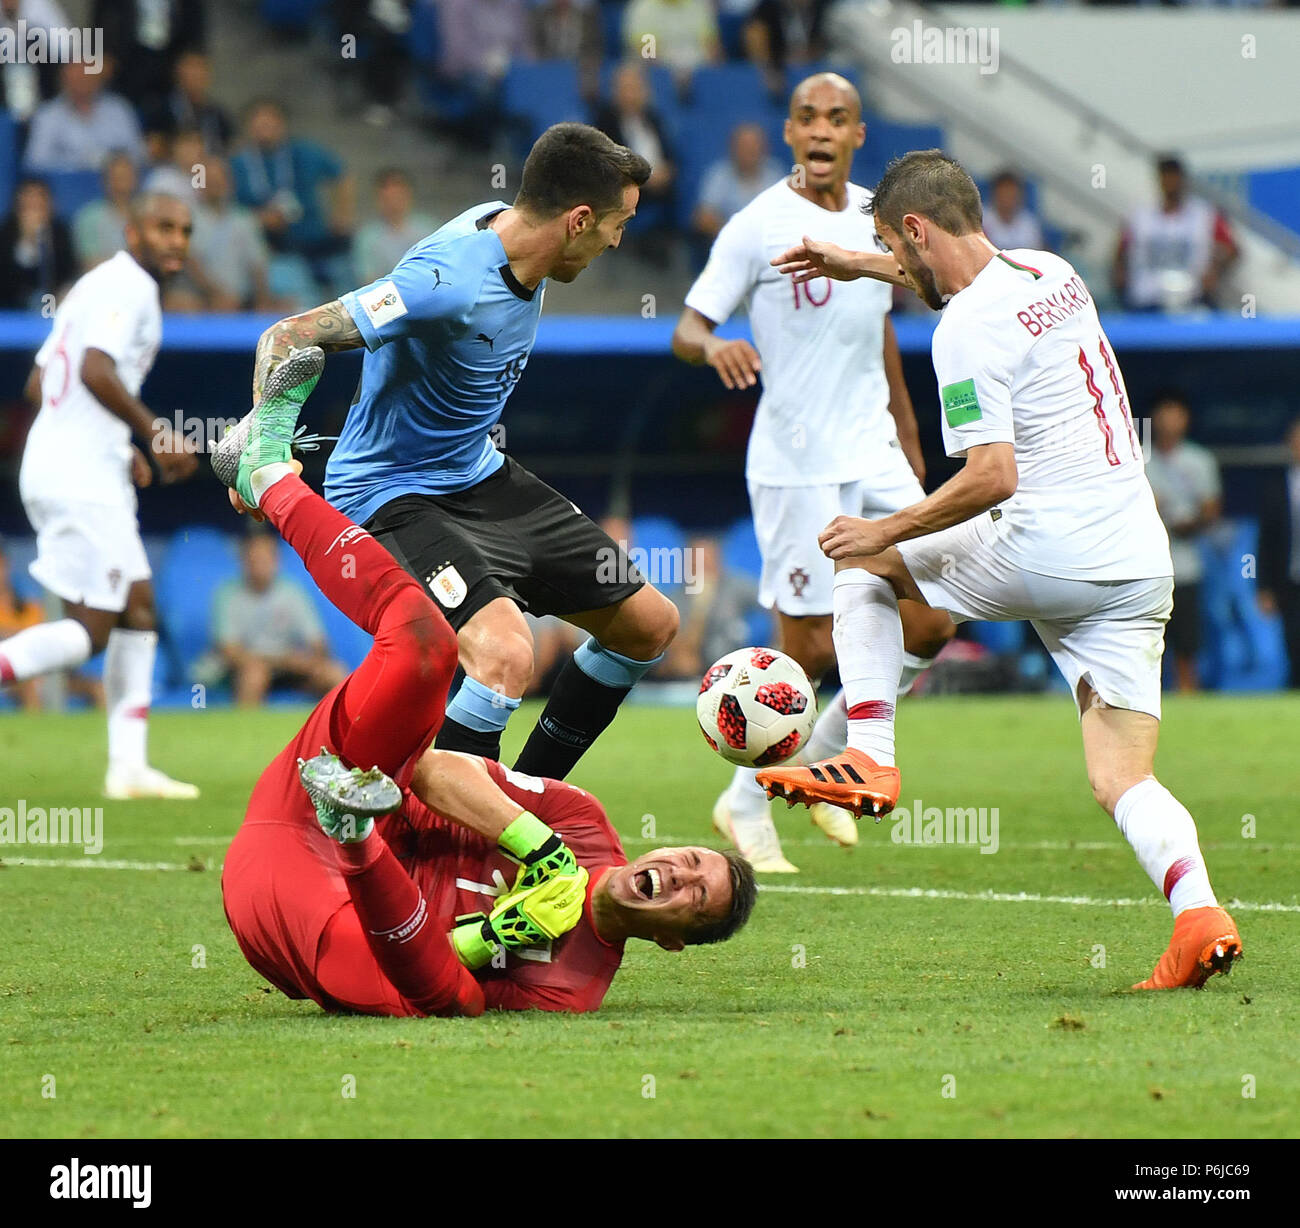 Sochi, Russia. 30th June, 2018. Goalkeeper Fernando Muslera (bottom) of Uruguay competes during the 2018 FIFA World Cup round of 16 match between Uruguay and Portugal in Sochi, Russia, on June 30, 2018. Uruguay won 2-1 and advanced to the quarter-final. Credit: Liu Dawei/Xinhua/Alamy Live News Stock Photo